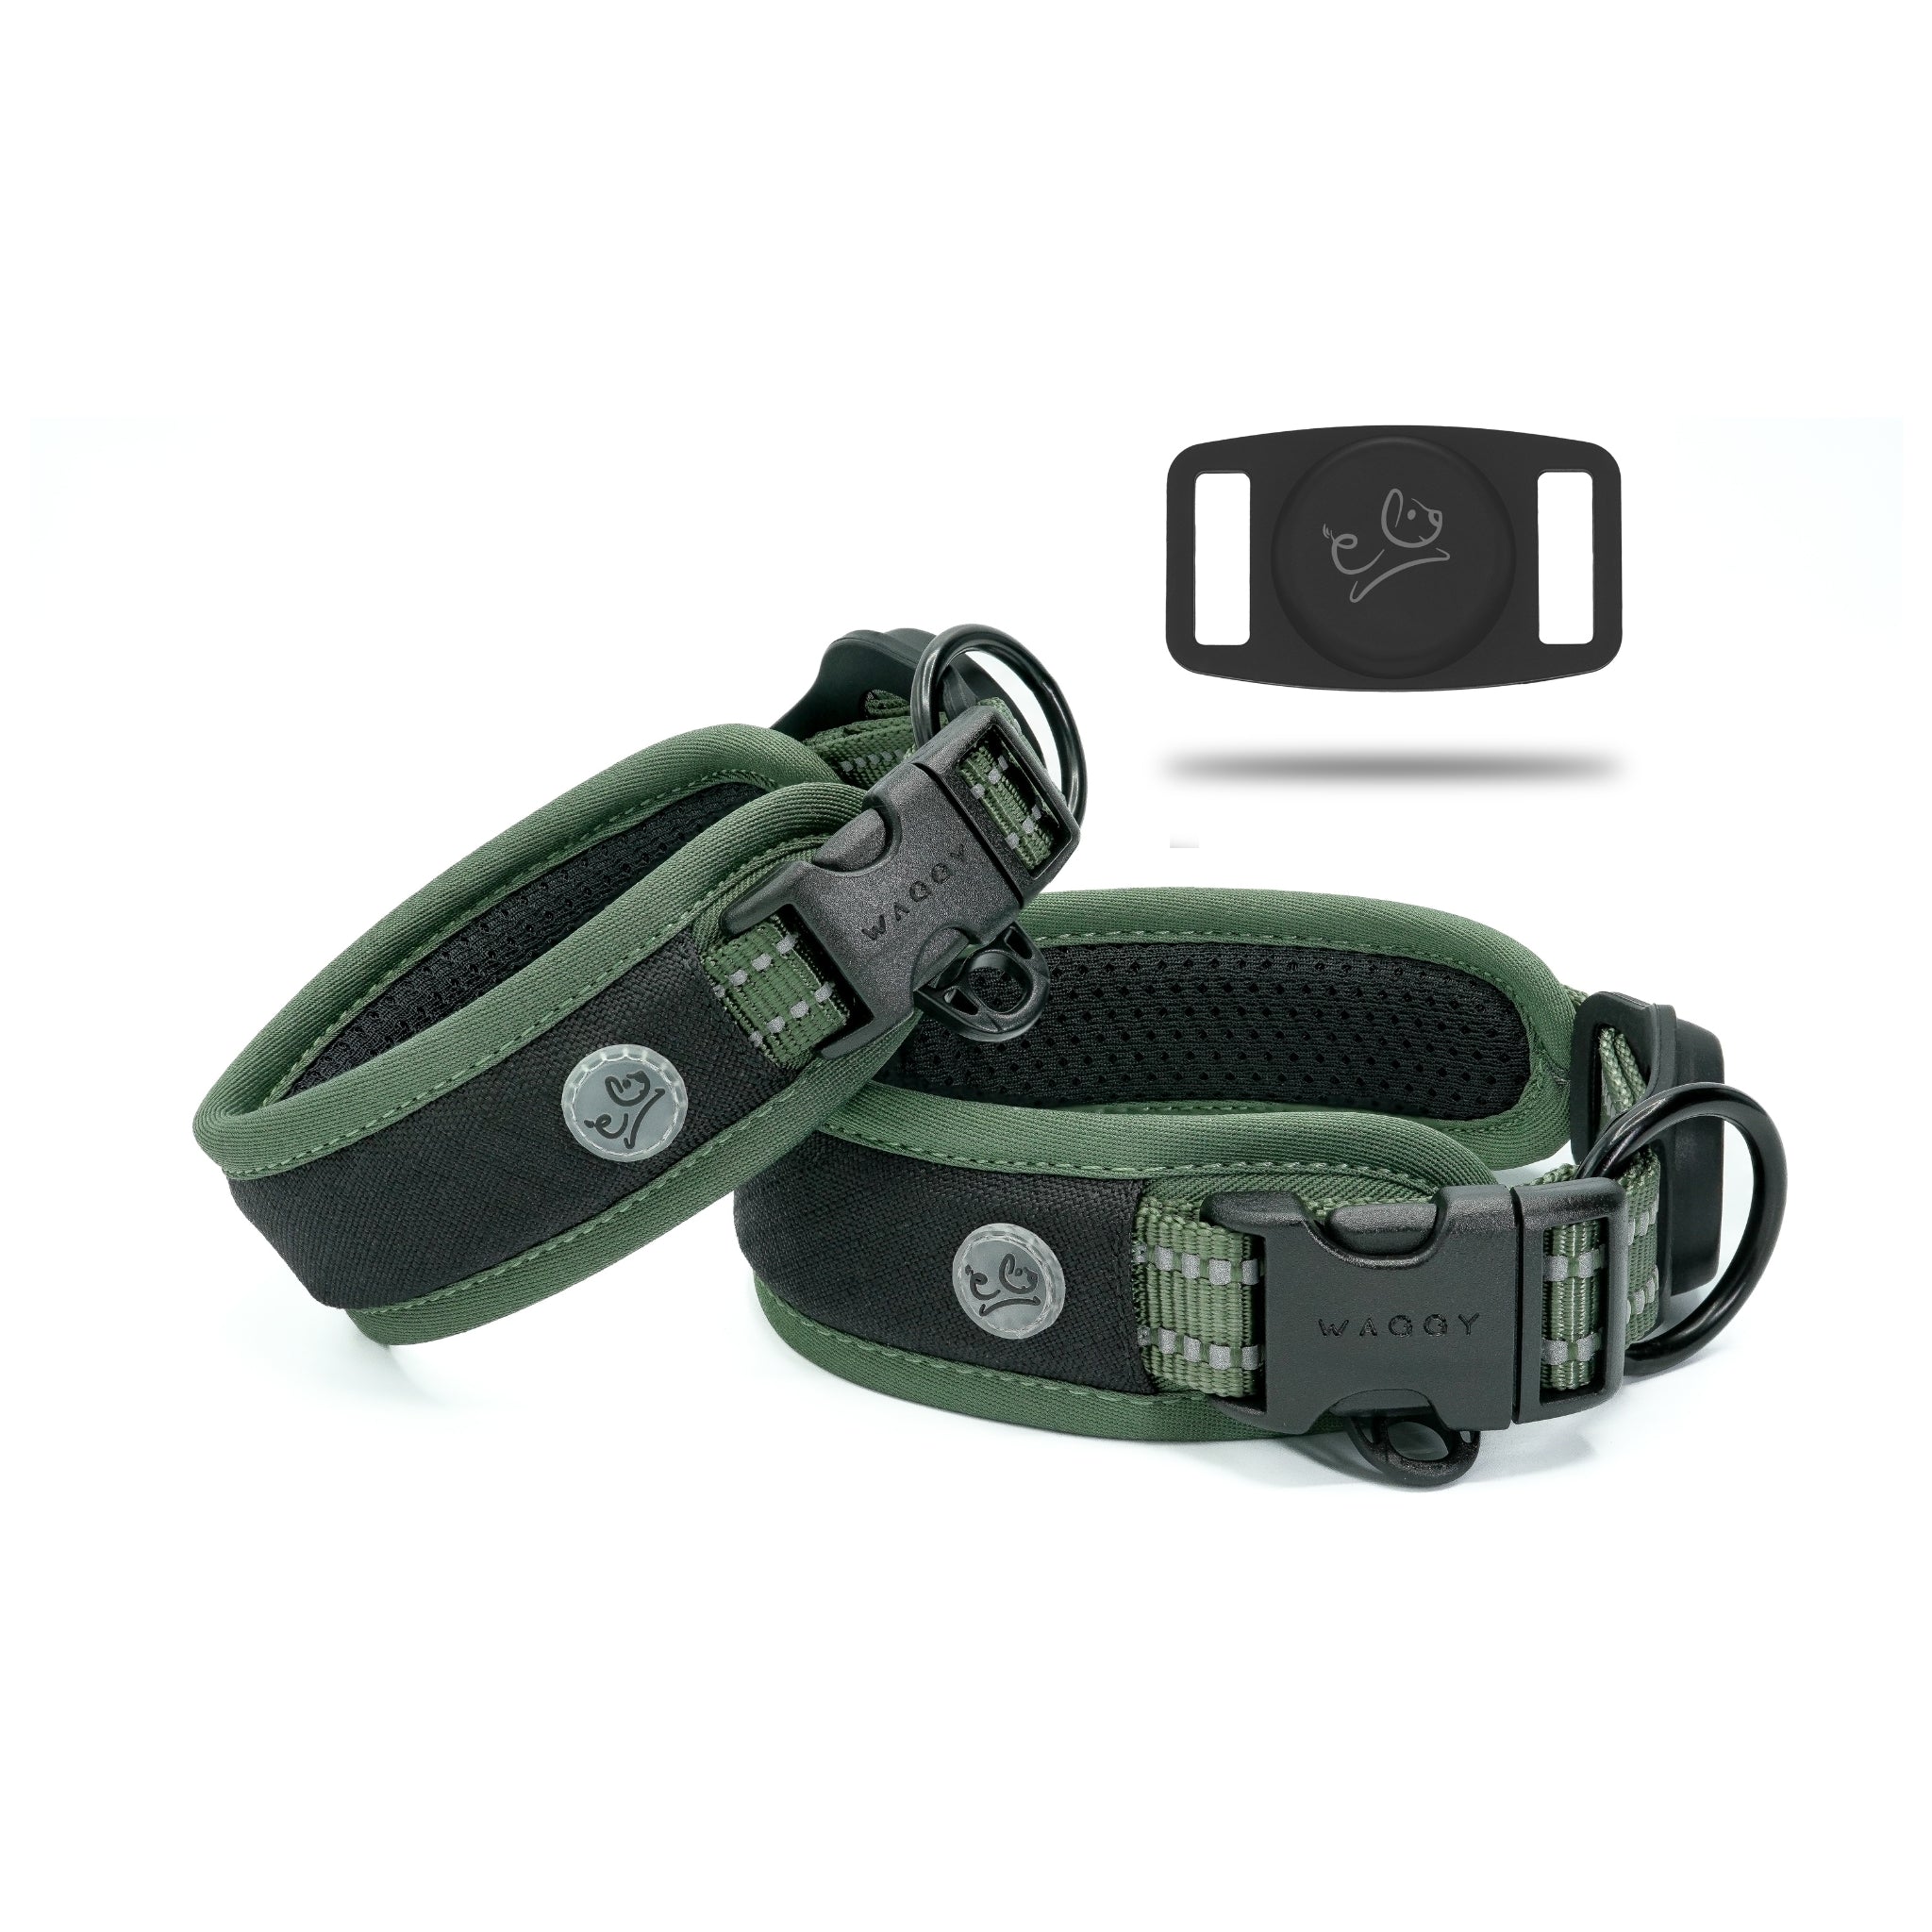 Two different size Green Air Mesh dog collar showing details and different angels of the product centered. Airtag Holder with Waggy logo showing on the right corner.